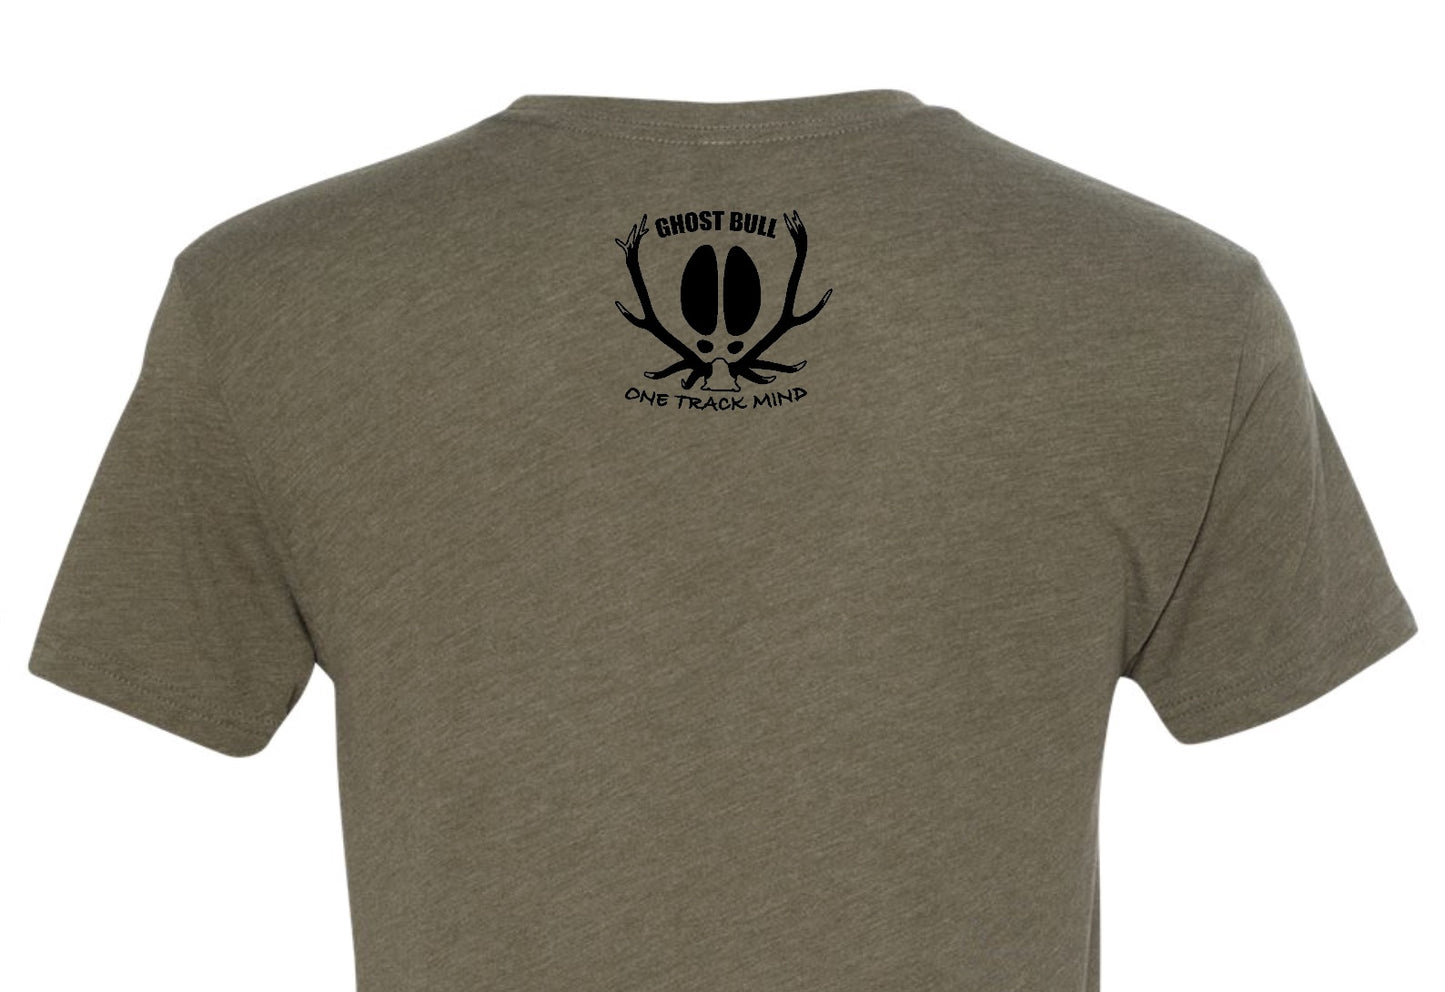 The Compass Roosie, T-Shirt